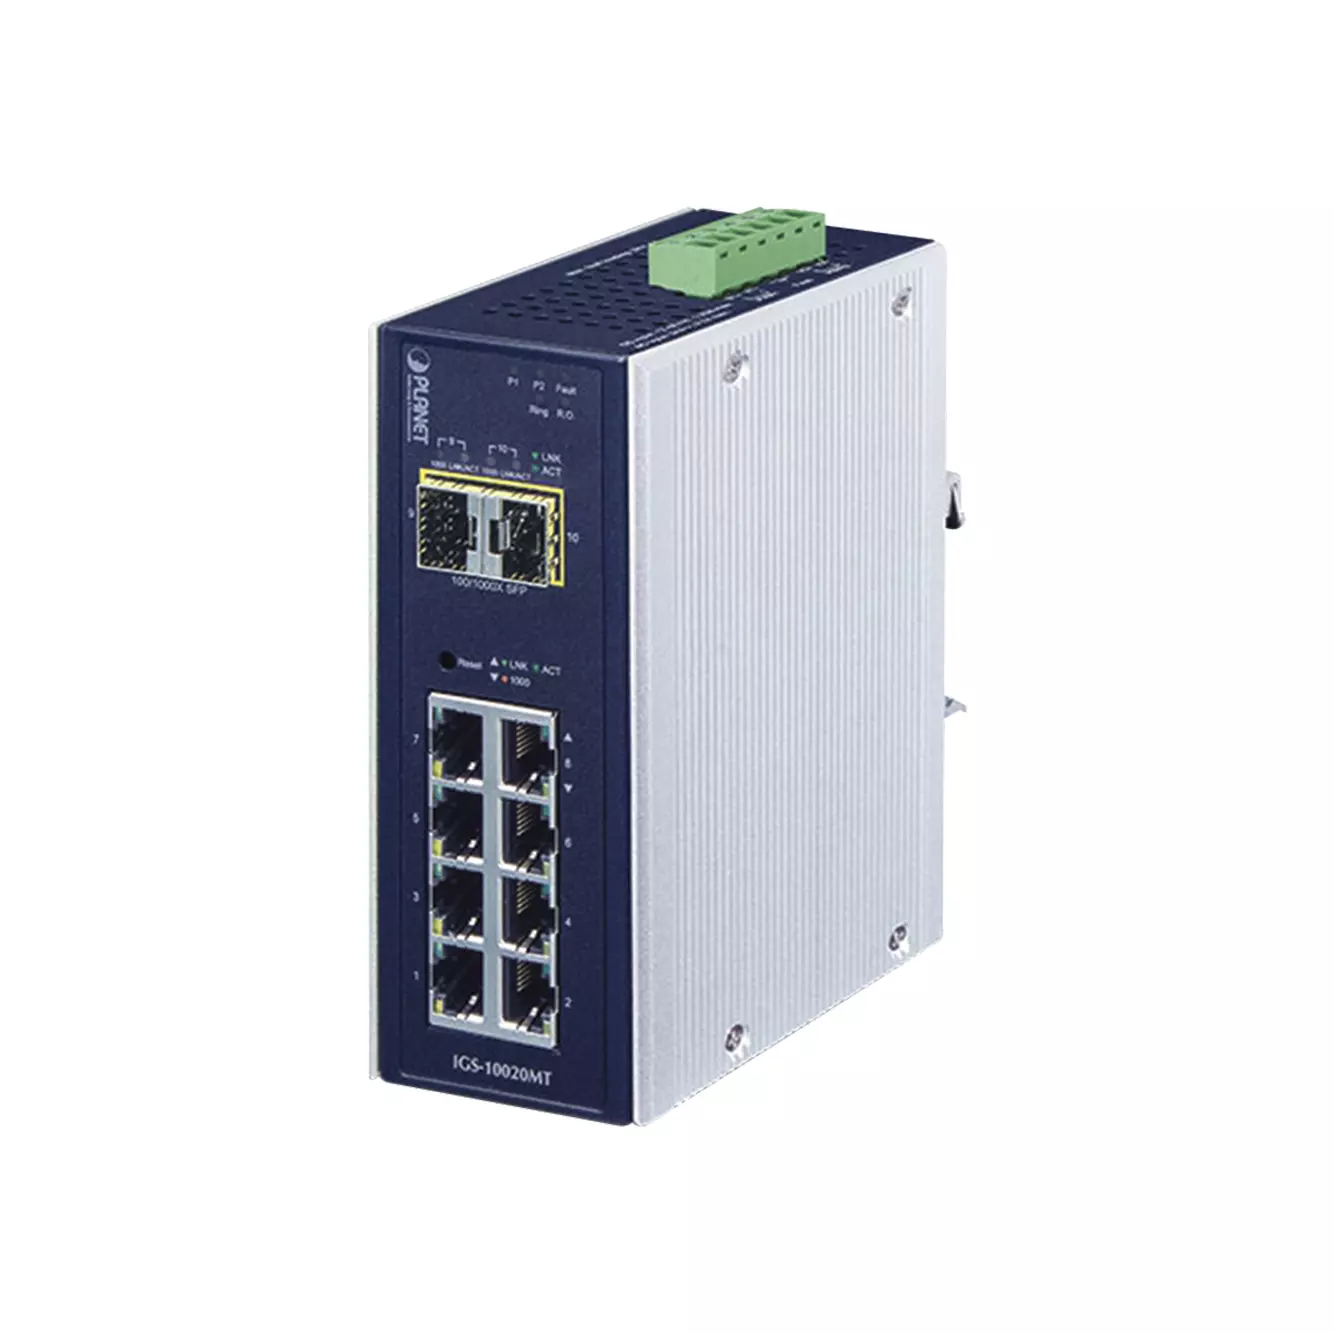 Switch industrial administrable capa 2 IGS-10020MT